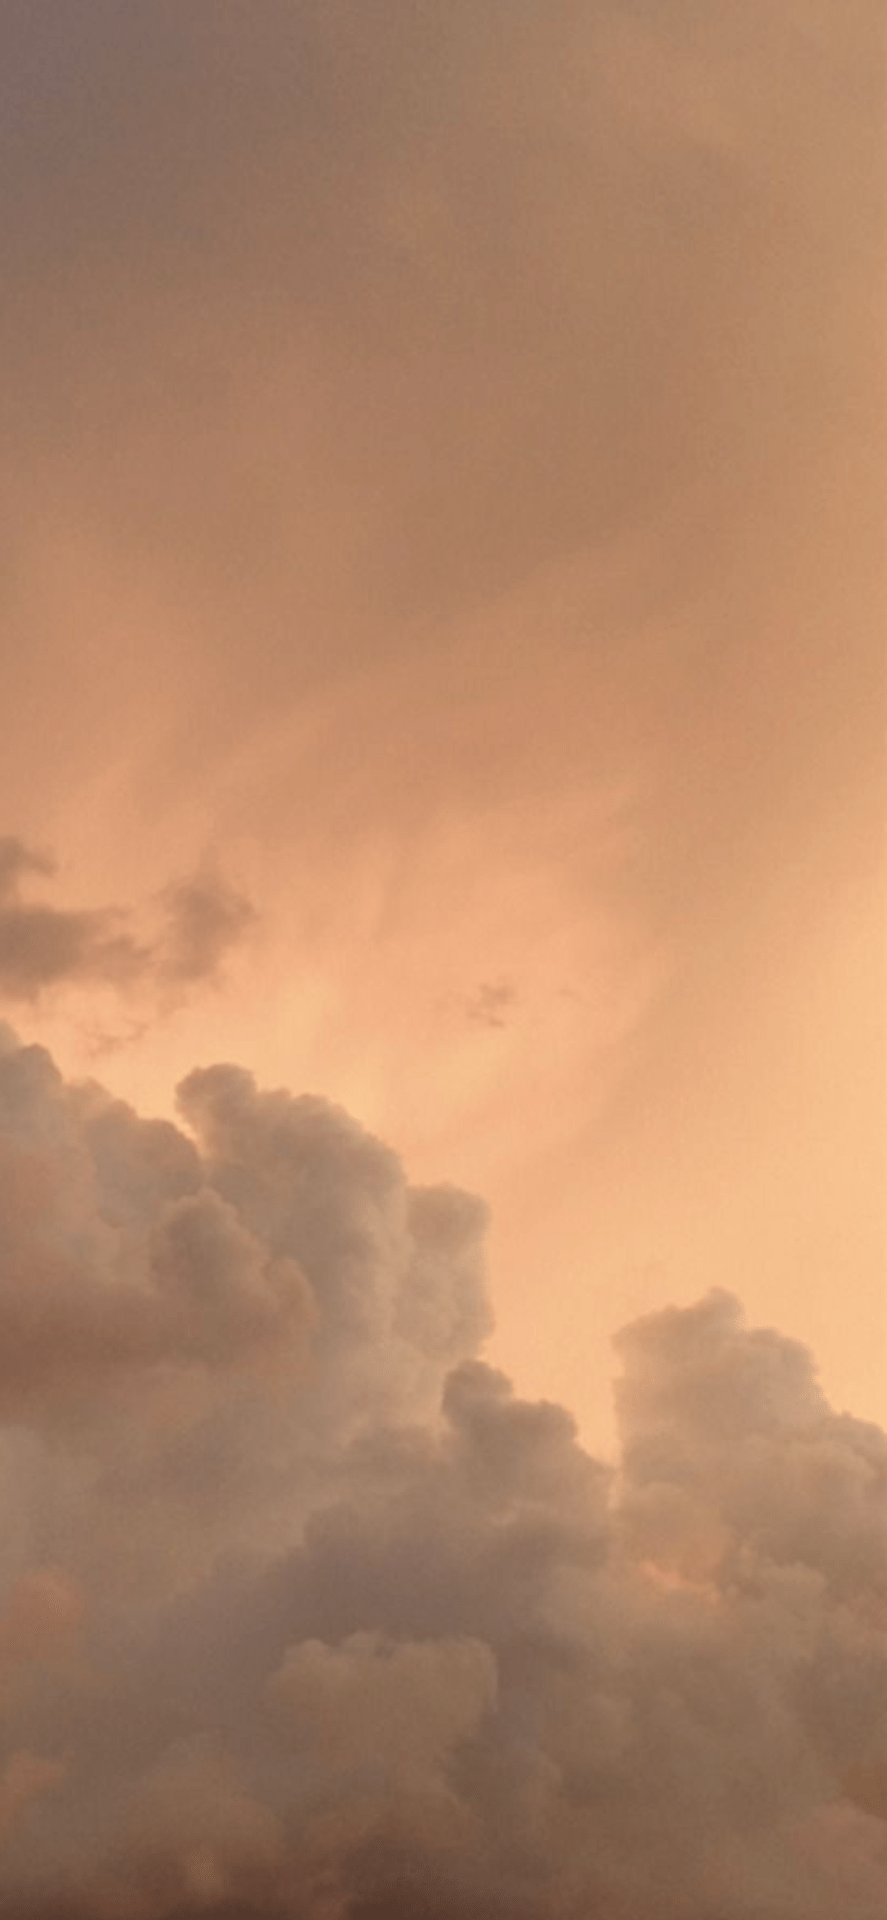 A sky with clouds at sunset - Light academia